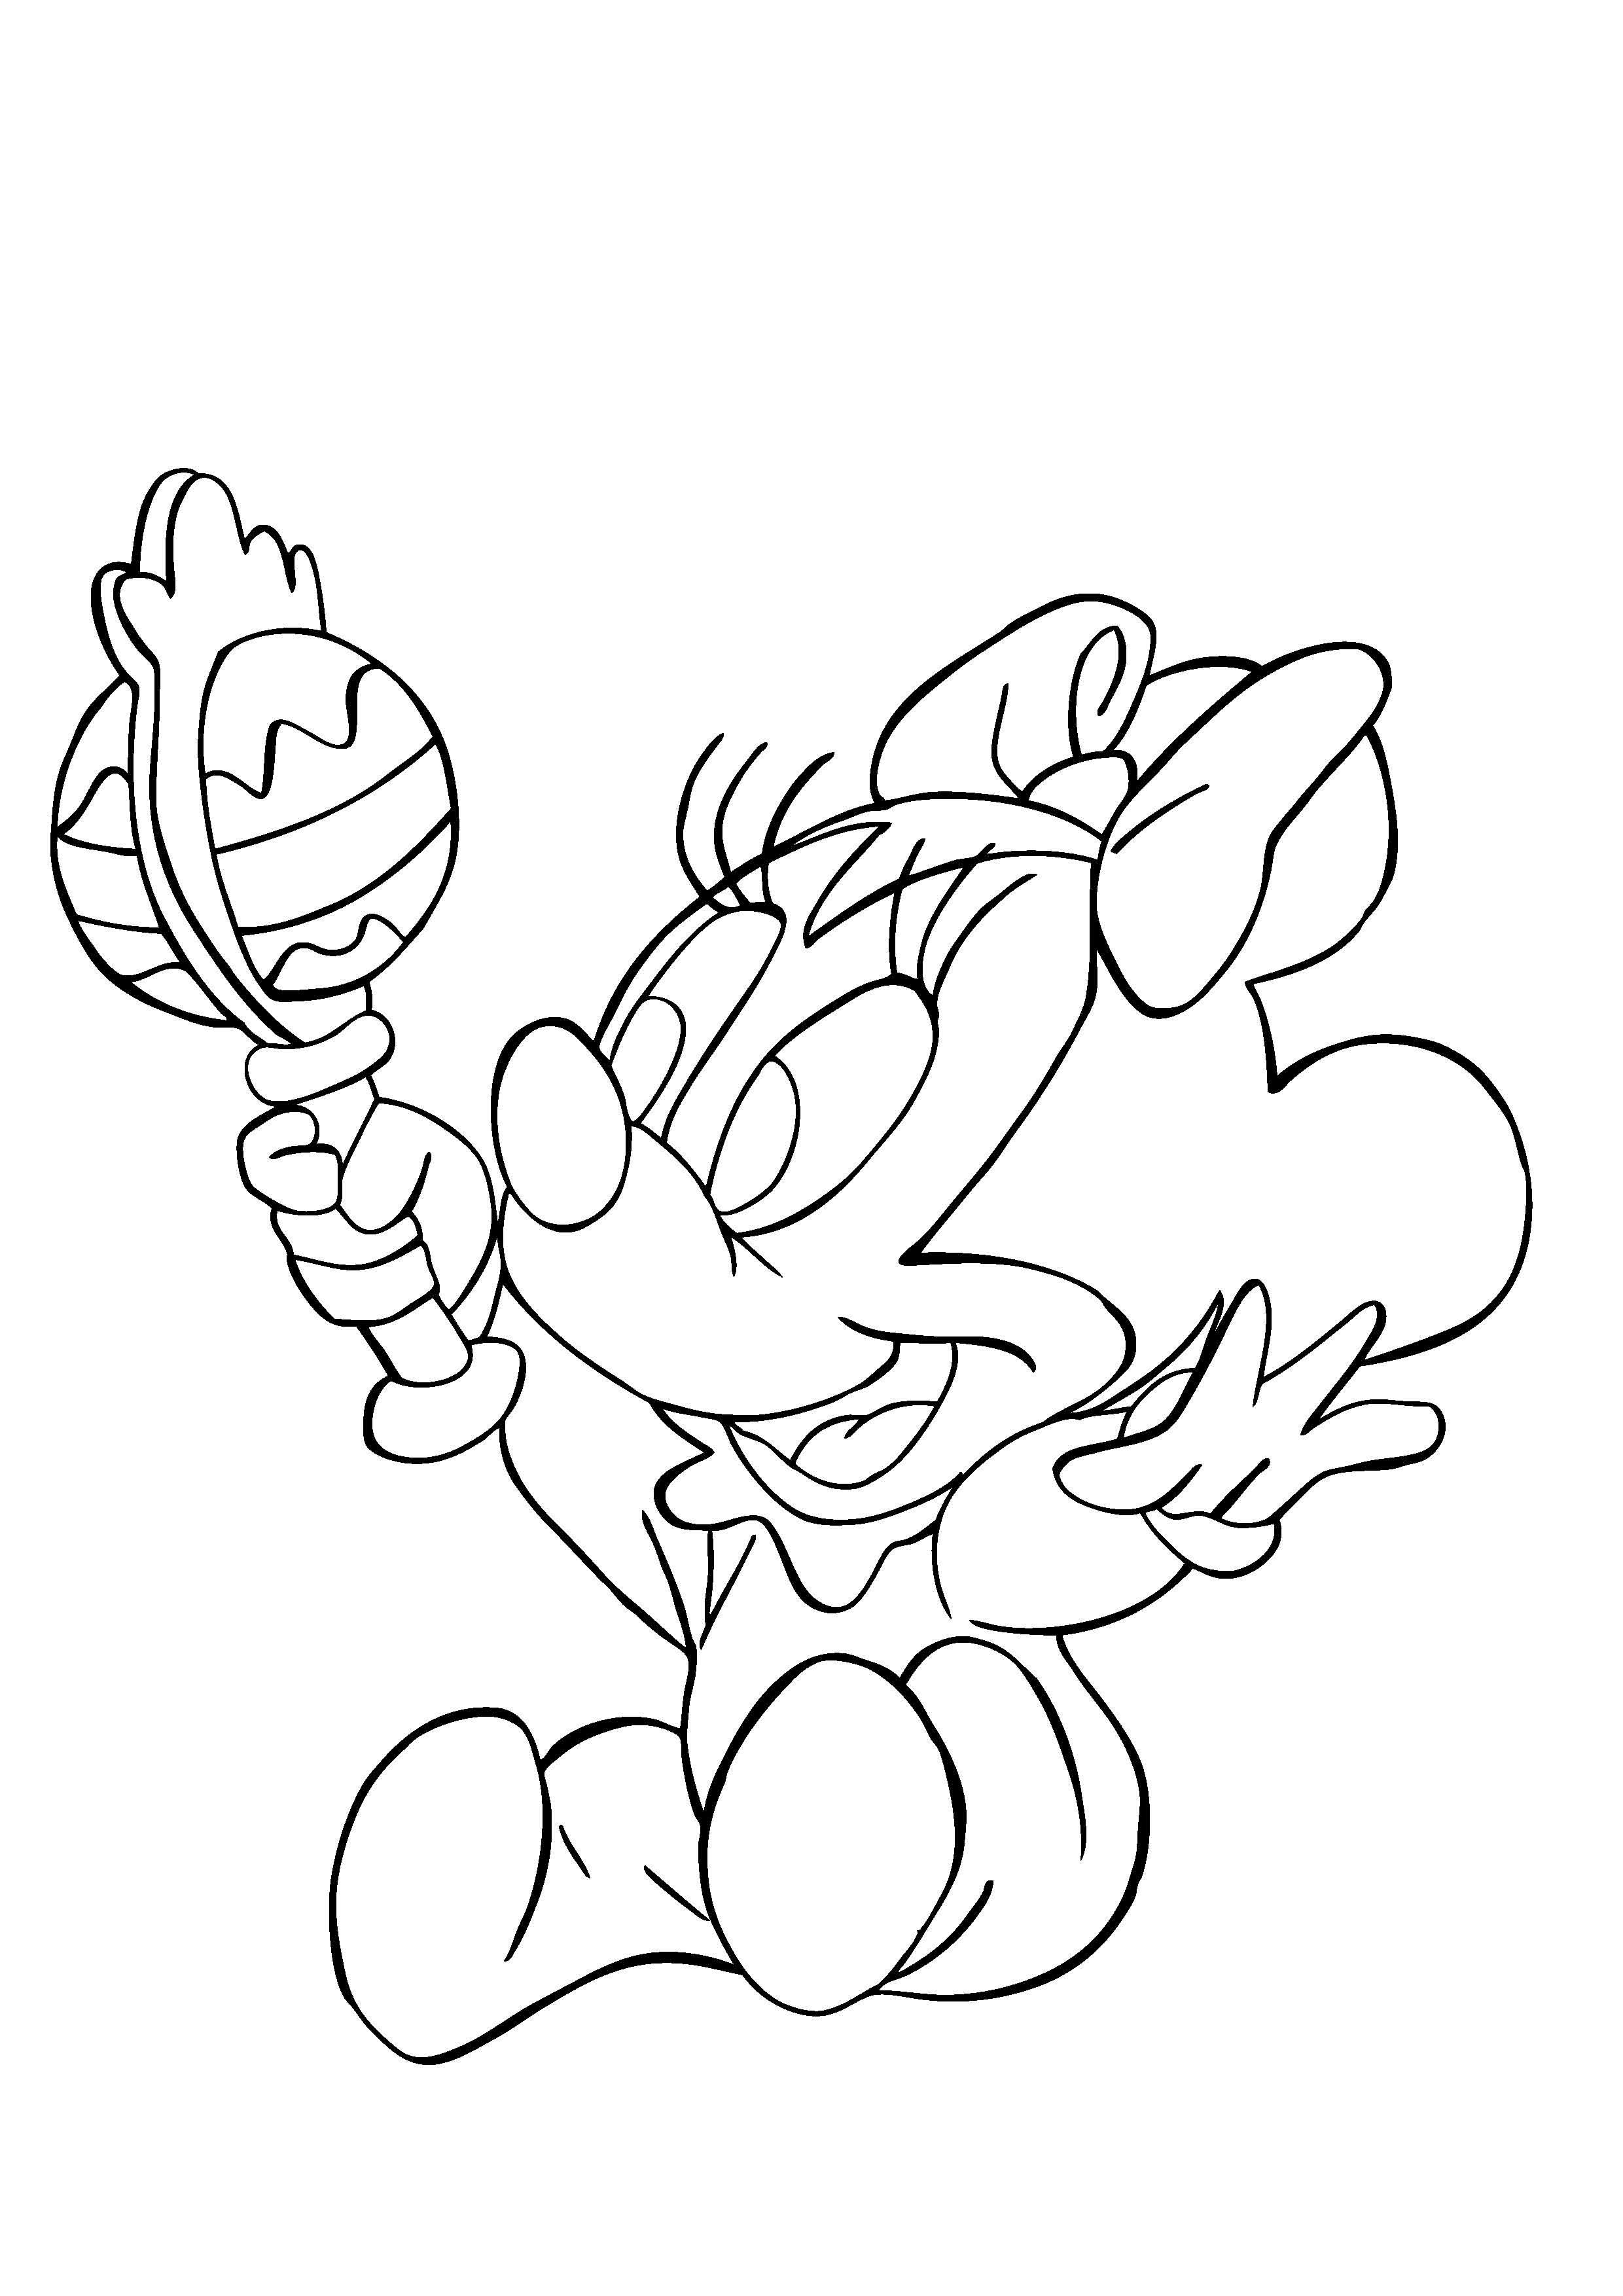 Minnie Mouse Coloring Pages Free Printable
 Free Printable Minnie Mouse Coloring Pages For Kids